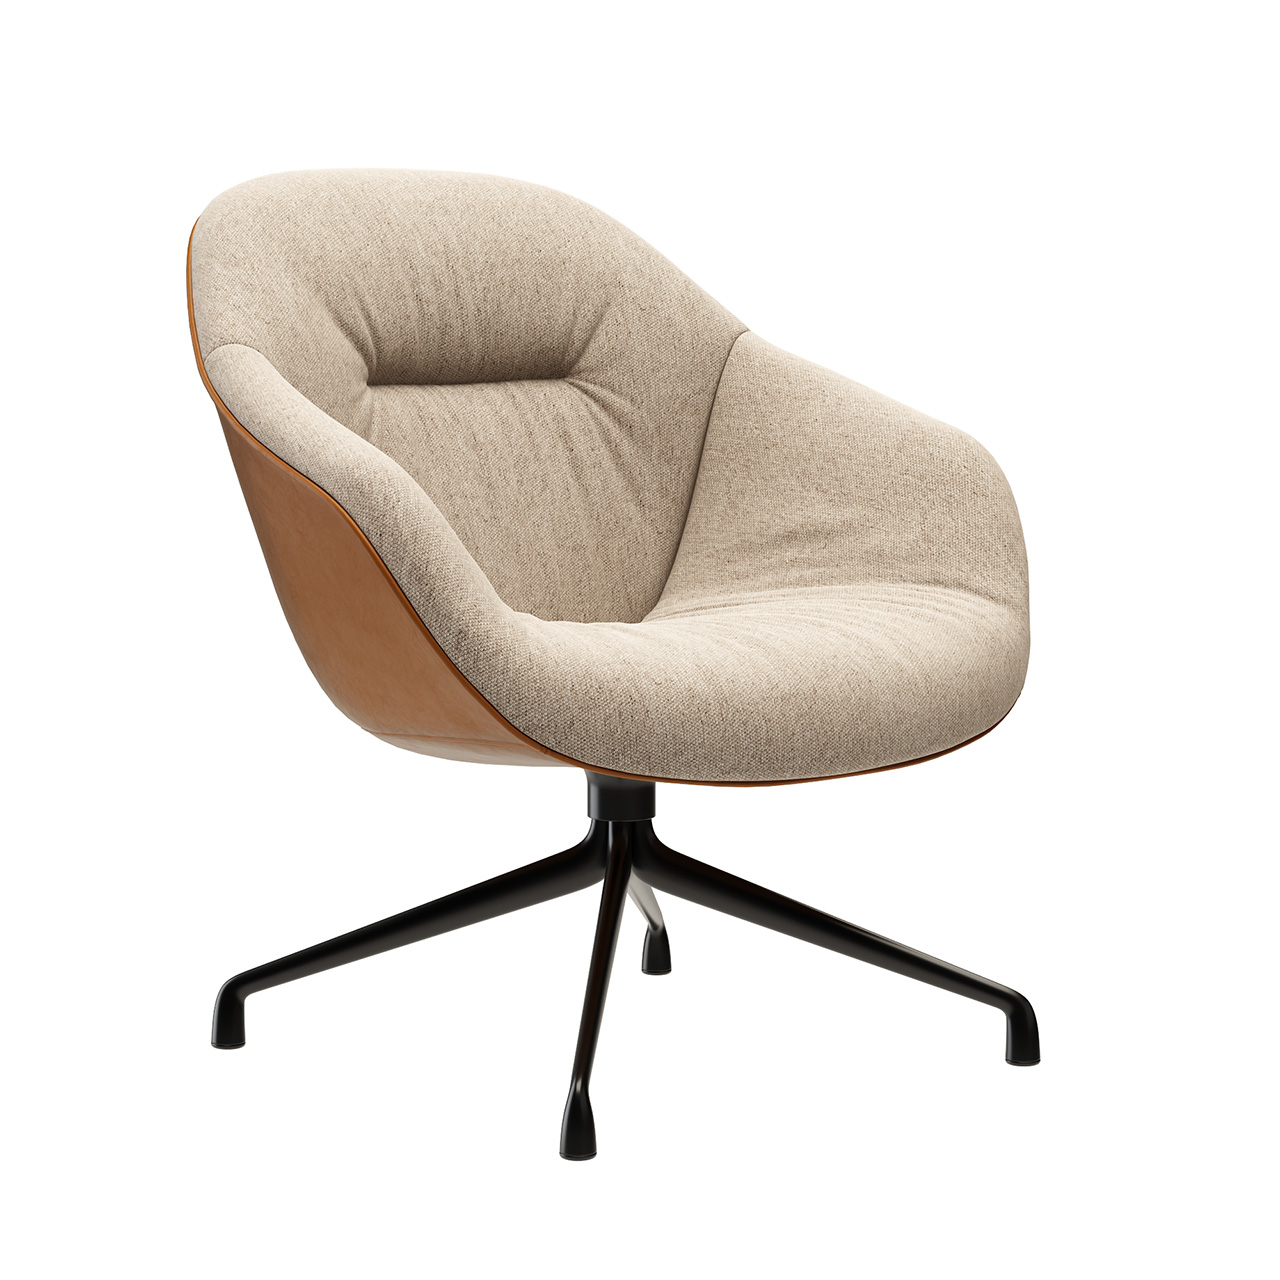 Aal 81 Soft Lounge Chair by Hay